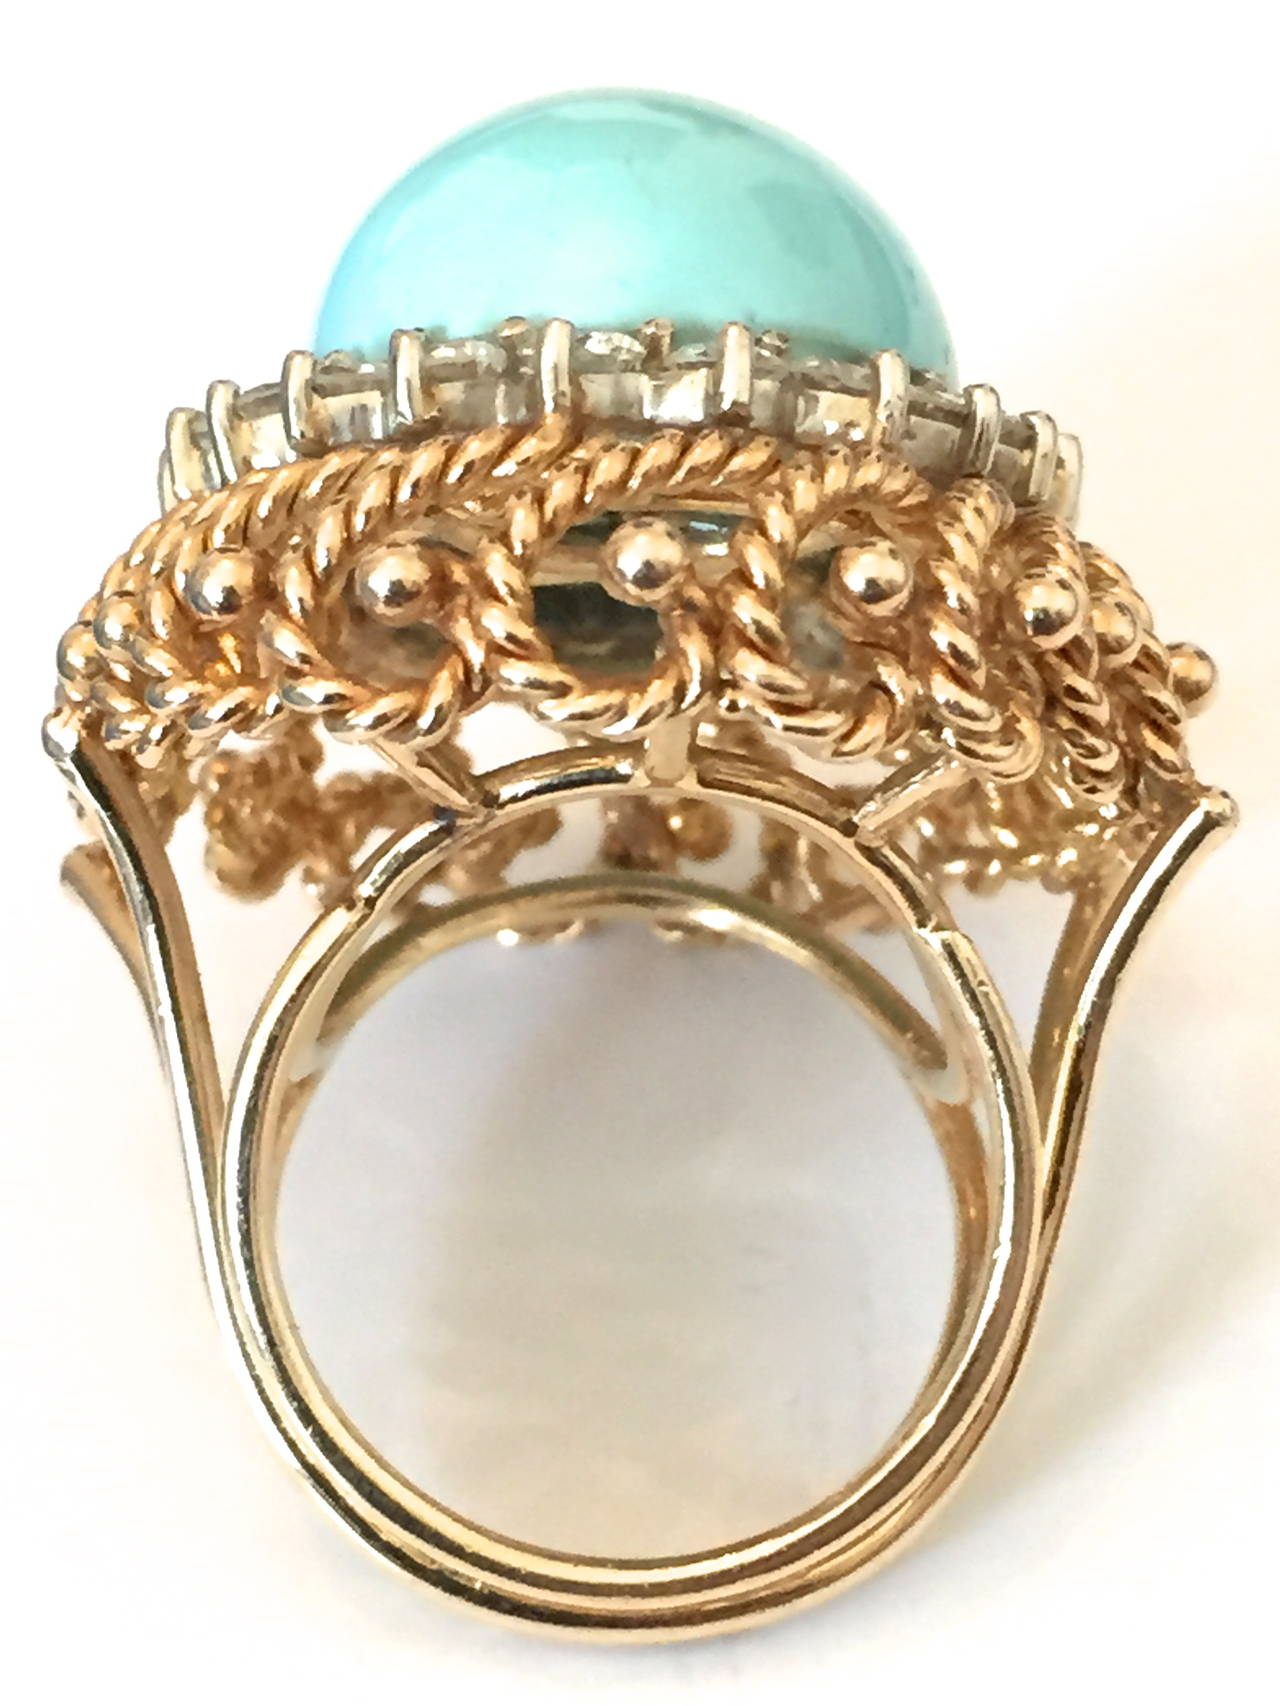 A Pretty turquoise and diamond cocktail ring. The robin's egg blue cabochon turquoise stone is surrounded by approximately 2.00ct of round white diamonds in an 1 1/4 